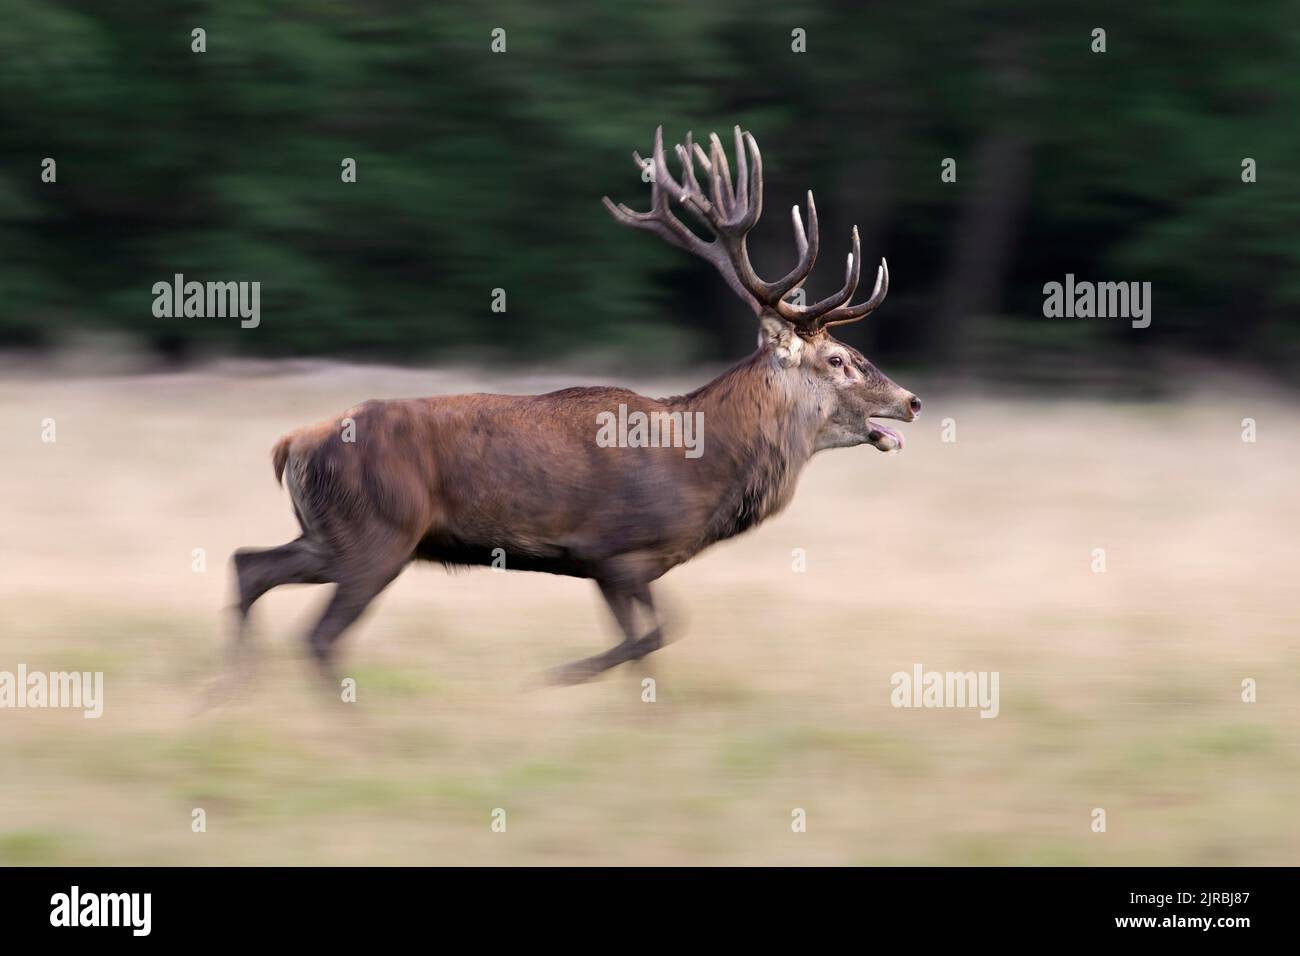 Red deer (Cervus elaphus) stag running in grassland at forest edge during the rut in autumn / fall Stock Photo